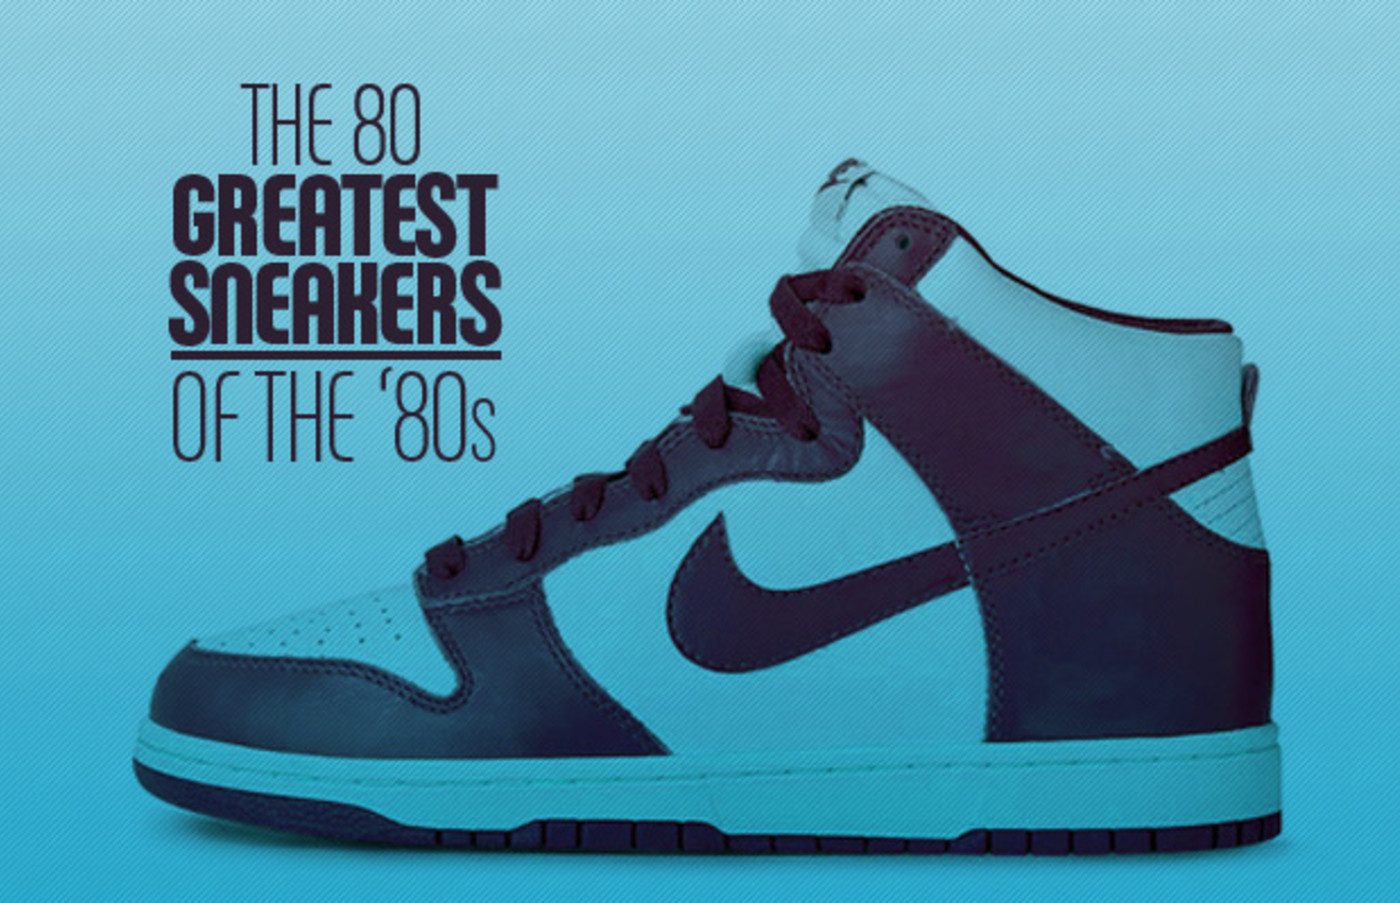 posterior frotis Gallina The Definitive List of the 80 Greatest Sneakers of the 80s | Complex